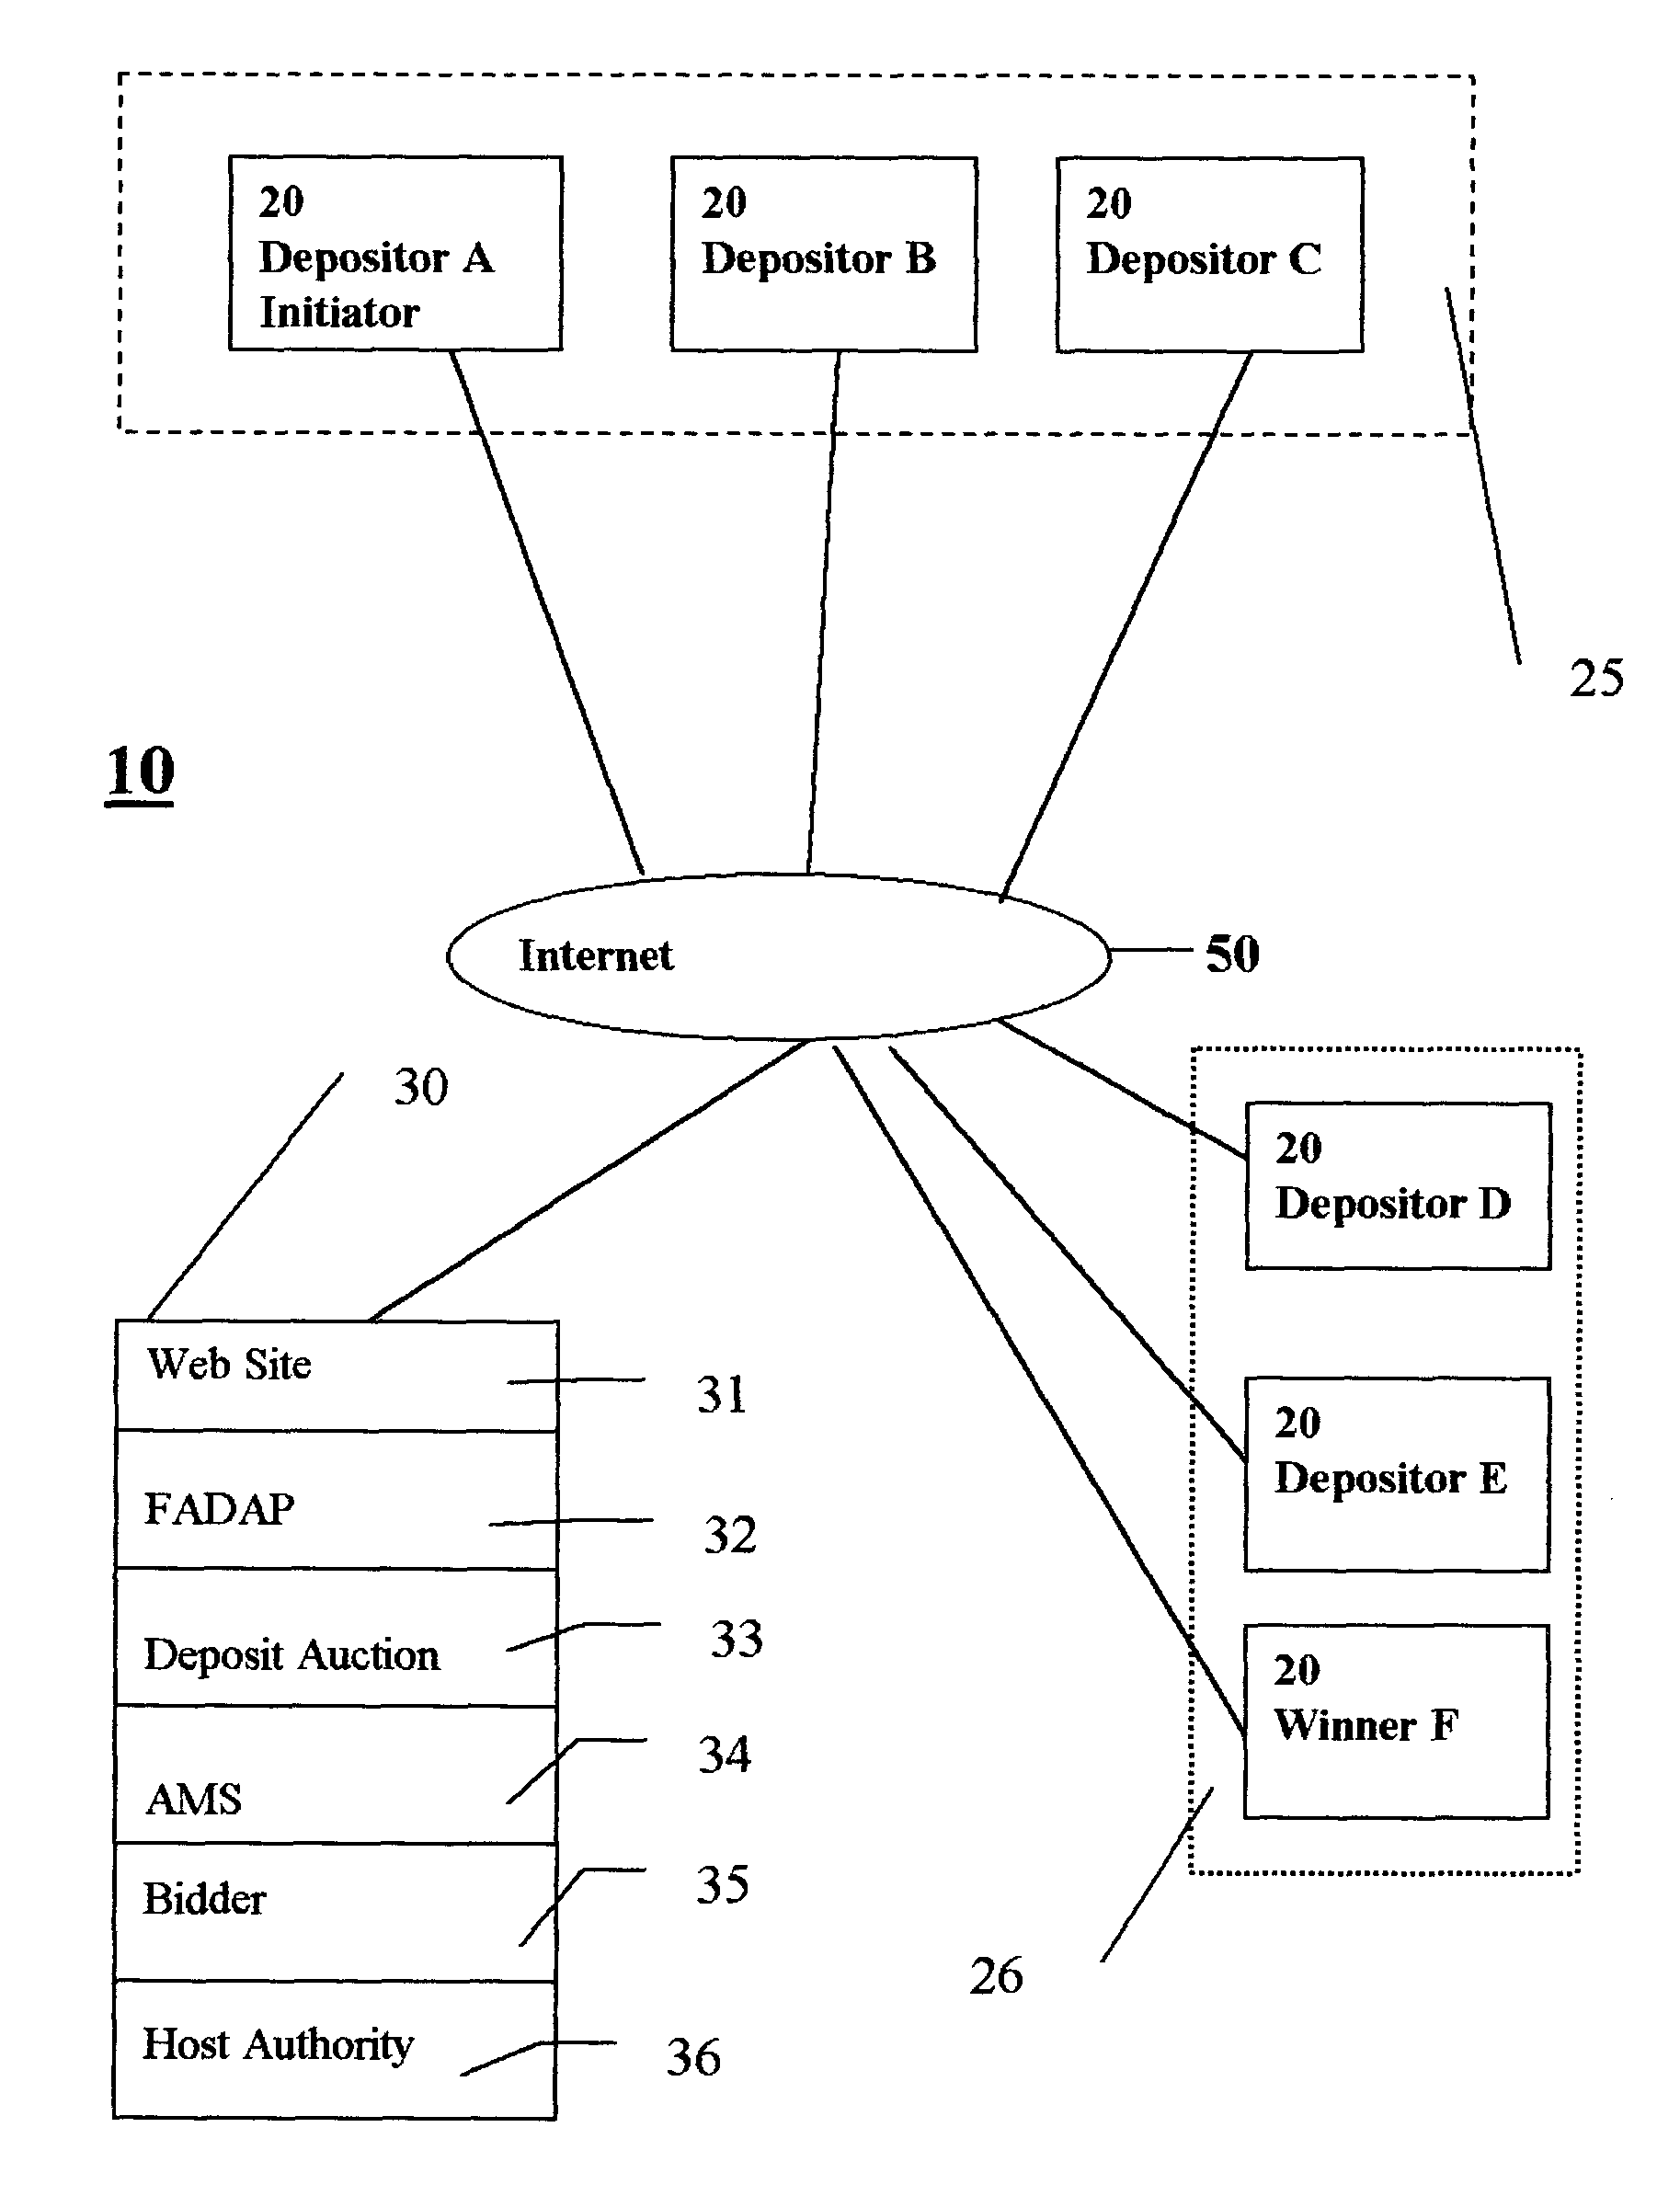 System and method for conducting an electronic financial asset deposit auction over computer network